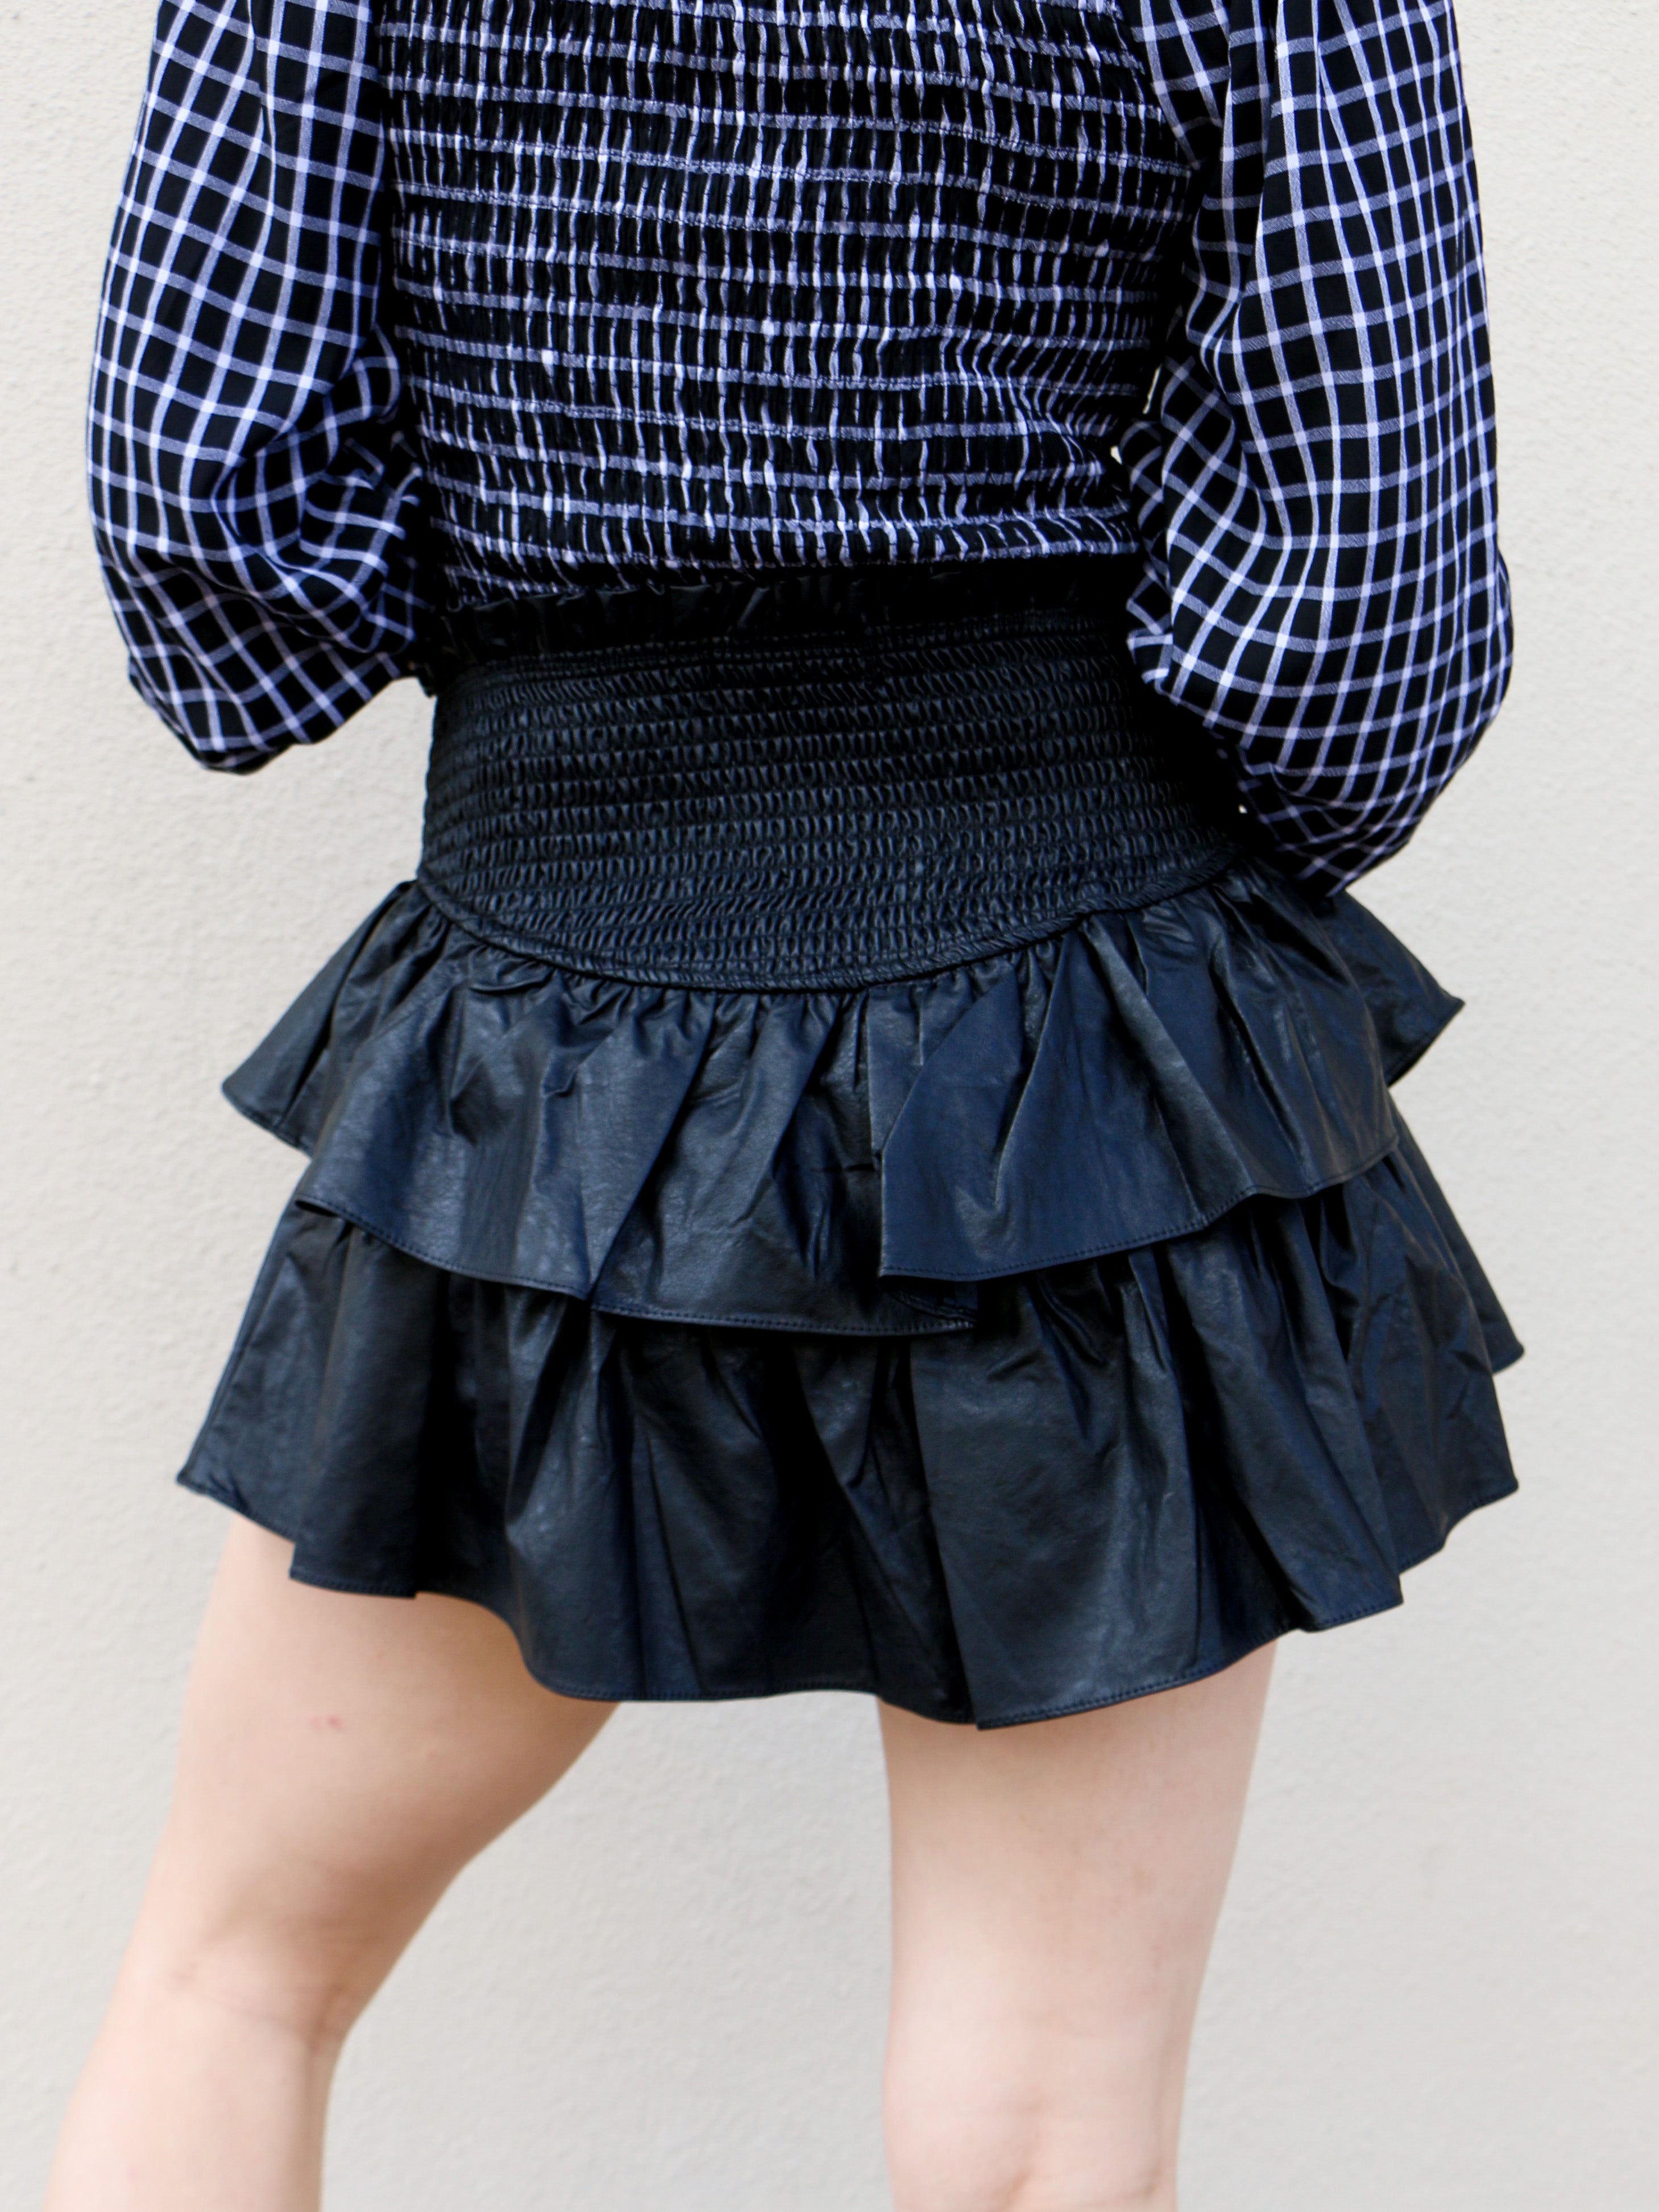 You Won My Heart Skirt in Black